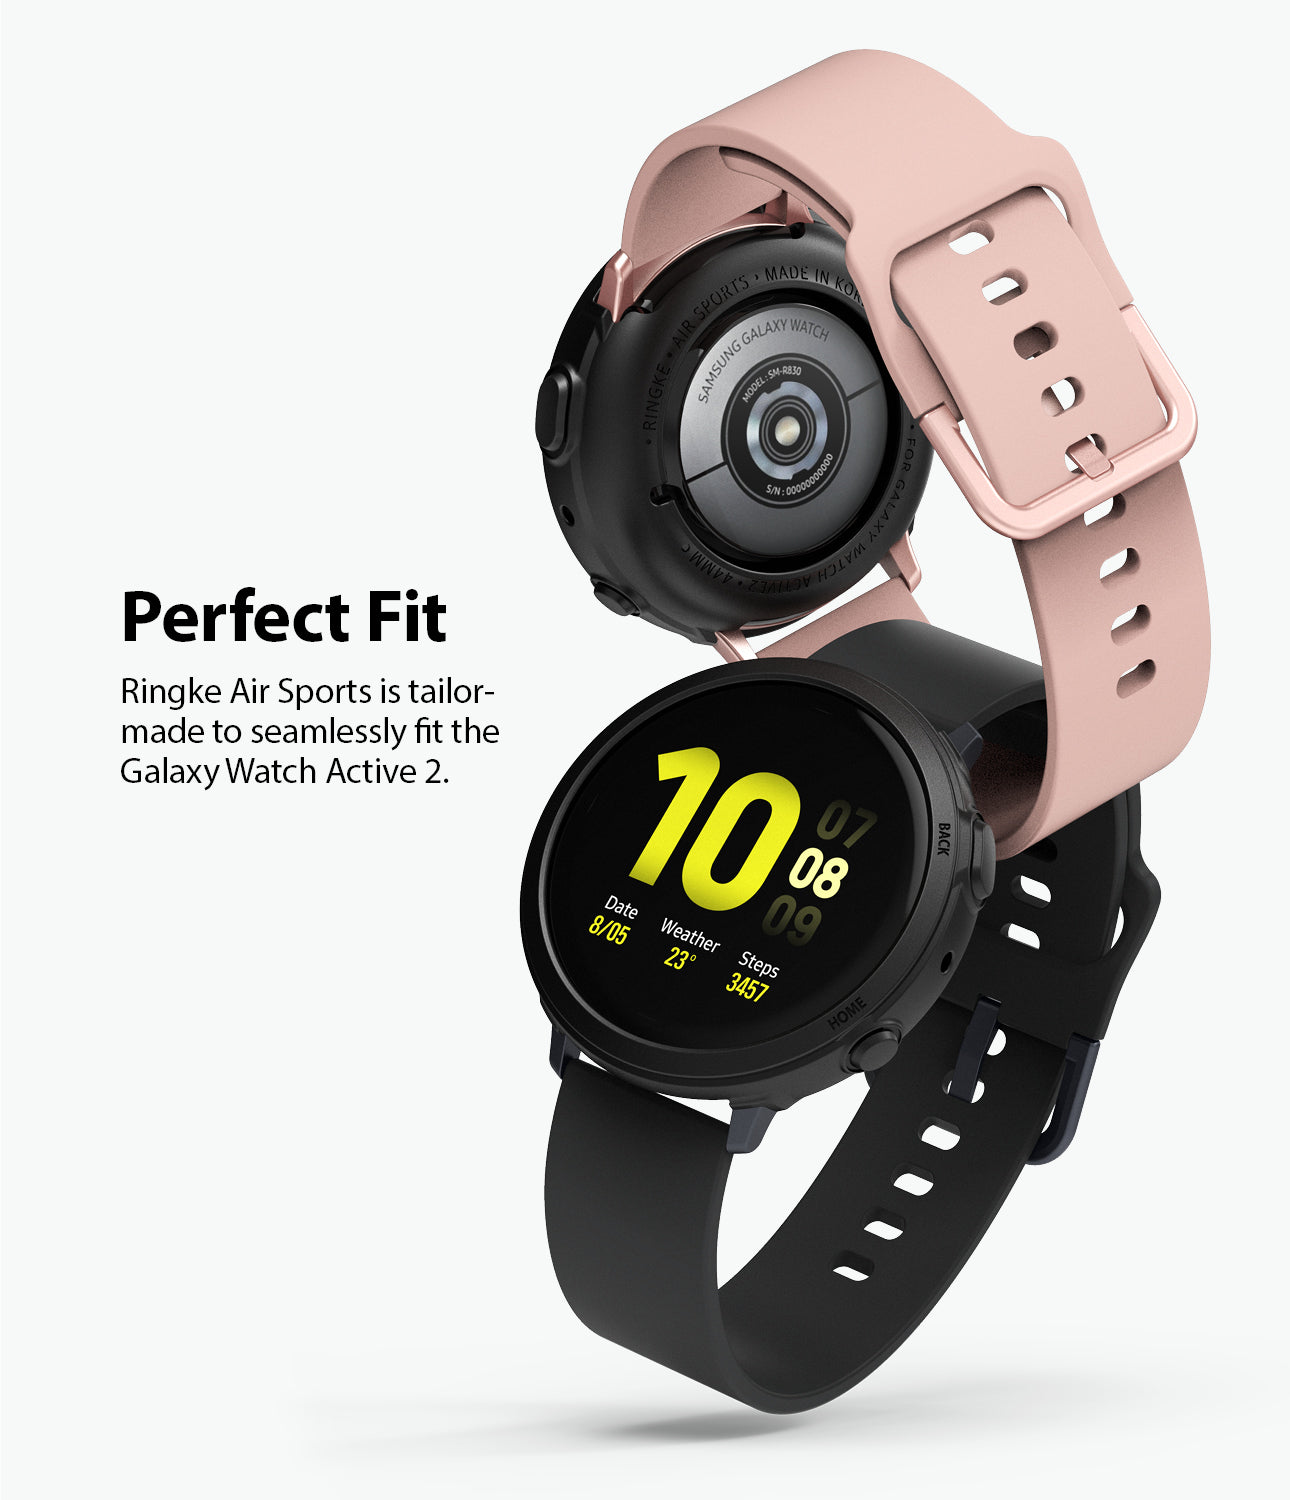 ringke air sport is tailor-made to seamlessly fit the galaxy watch active 2 44mm